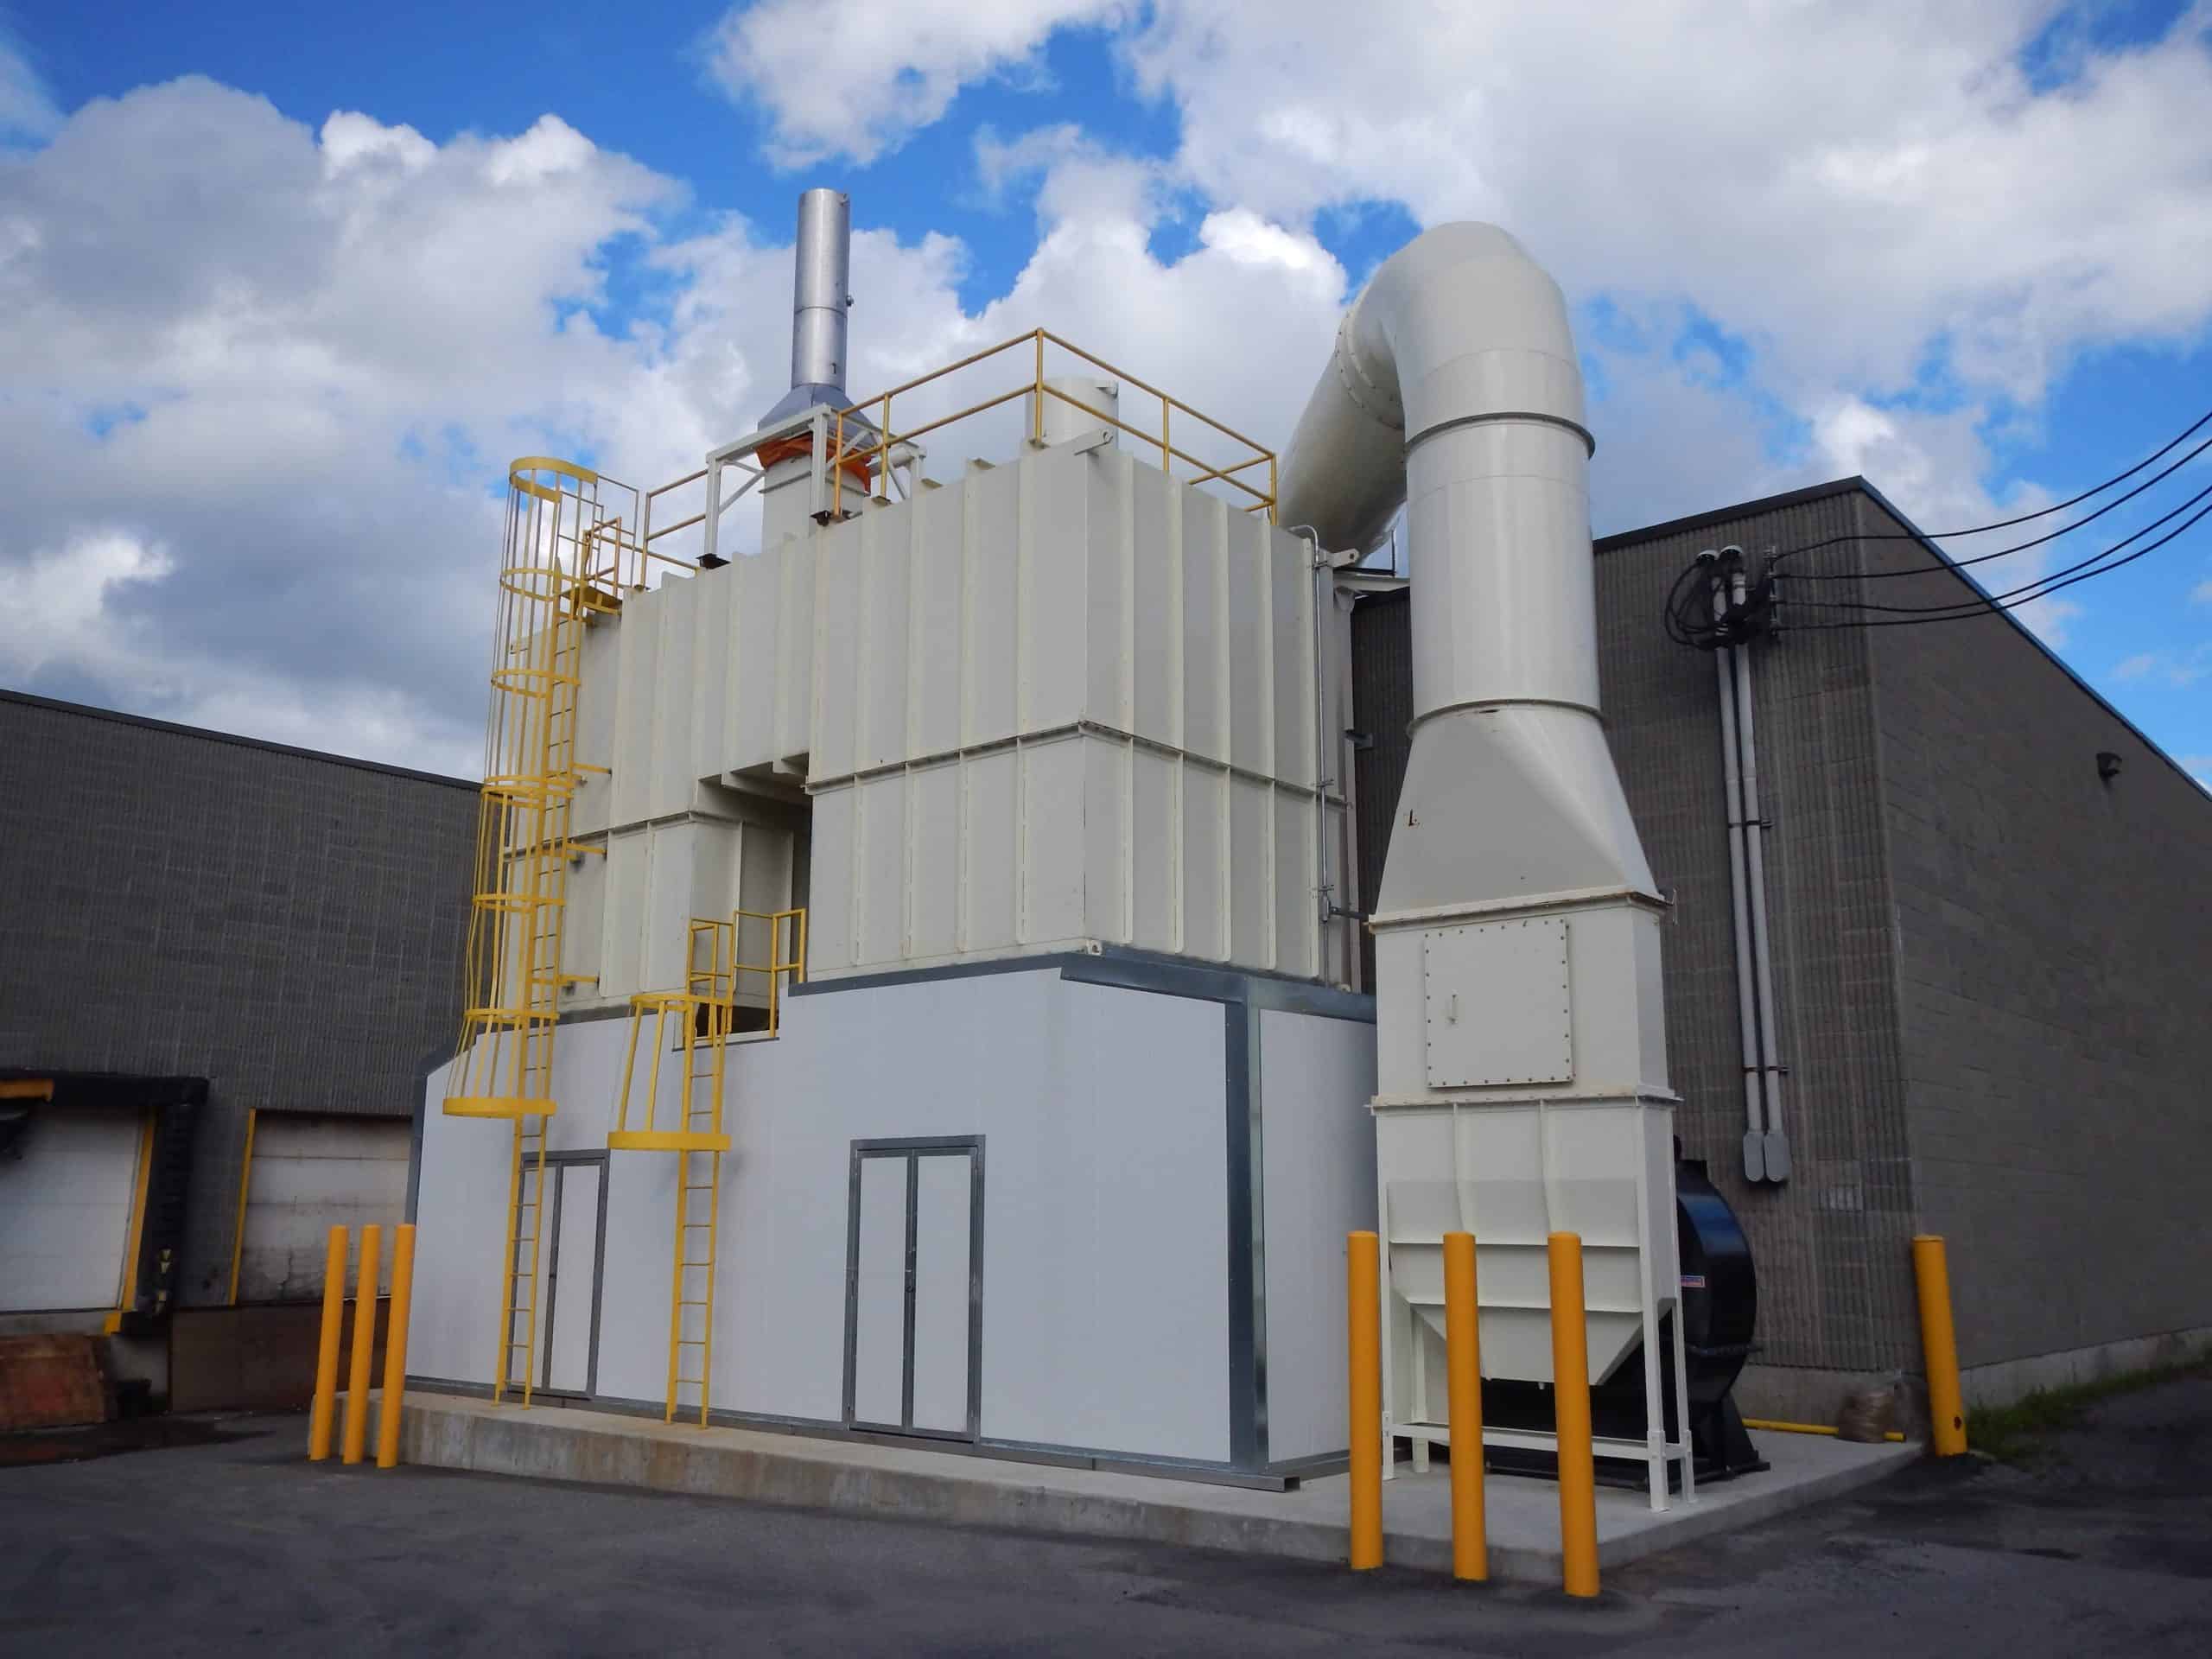 Regenerative Thermal Oxidizer Cleaning